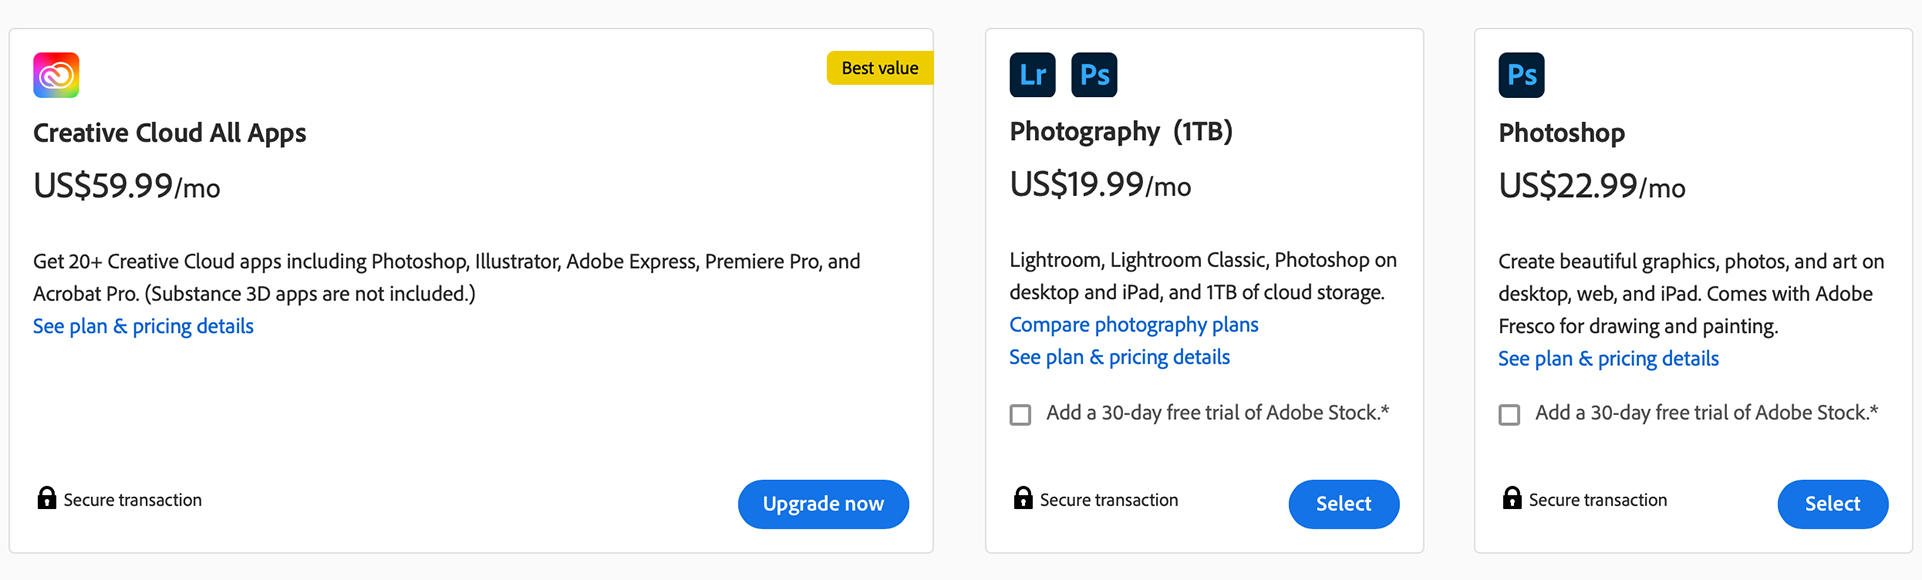 buy photoshop outright